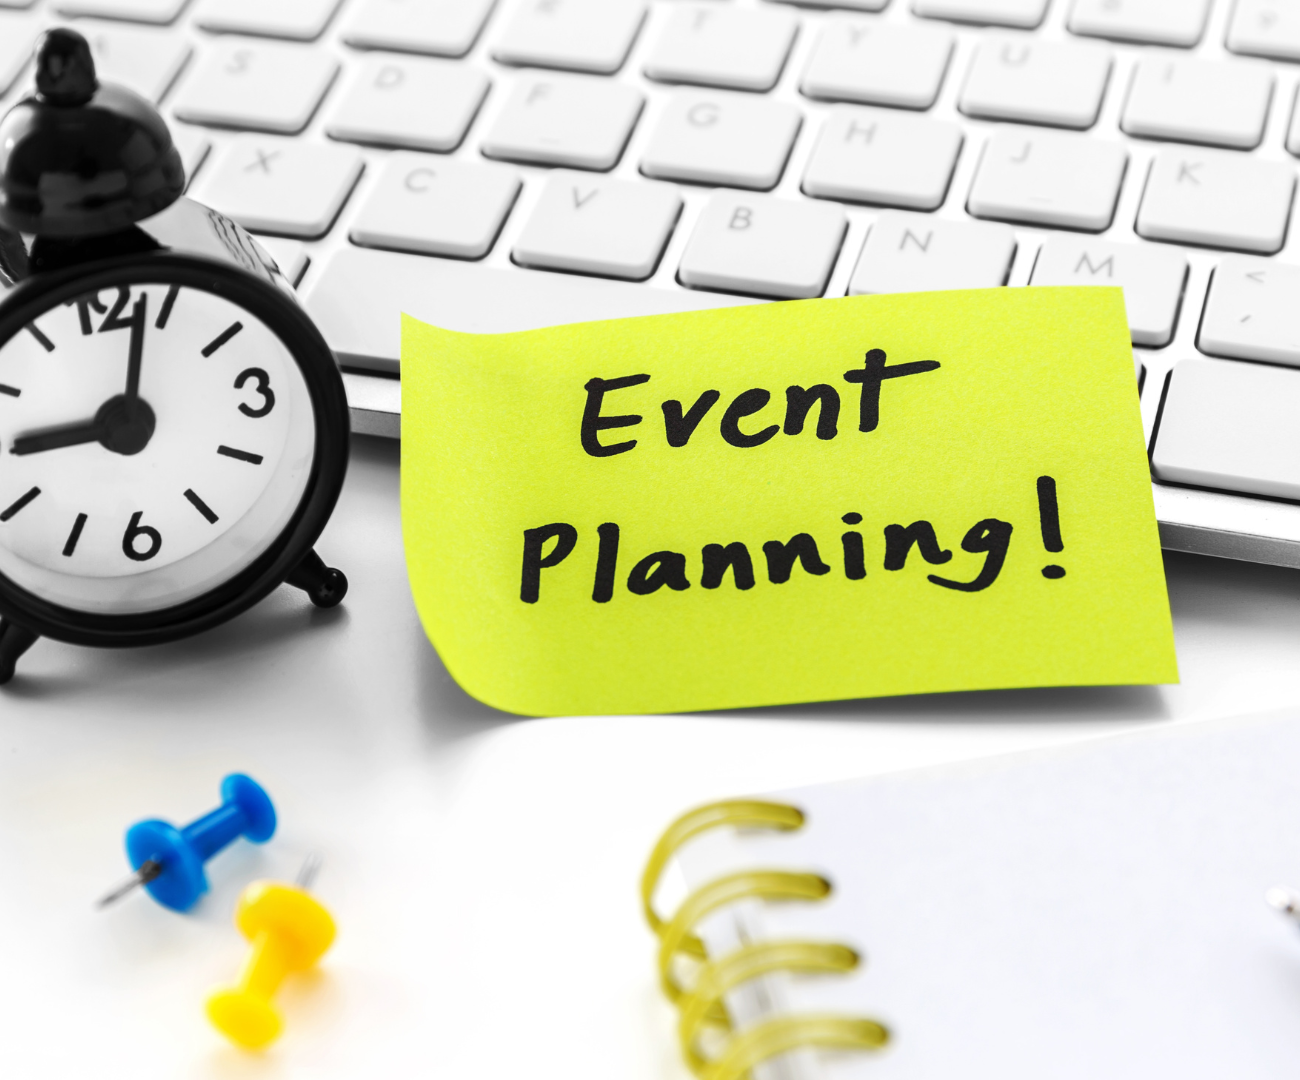 event planning written on a sticky note